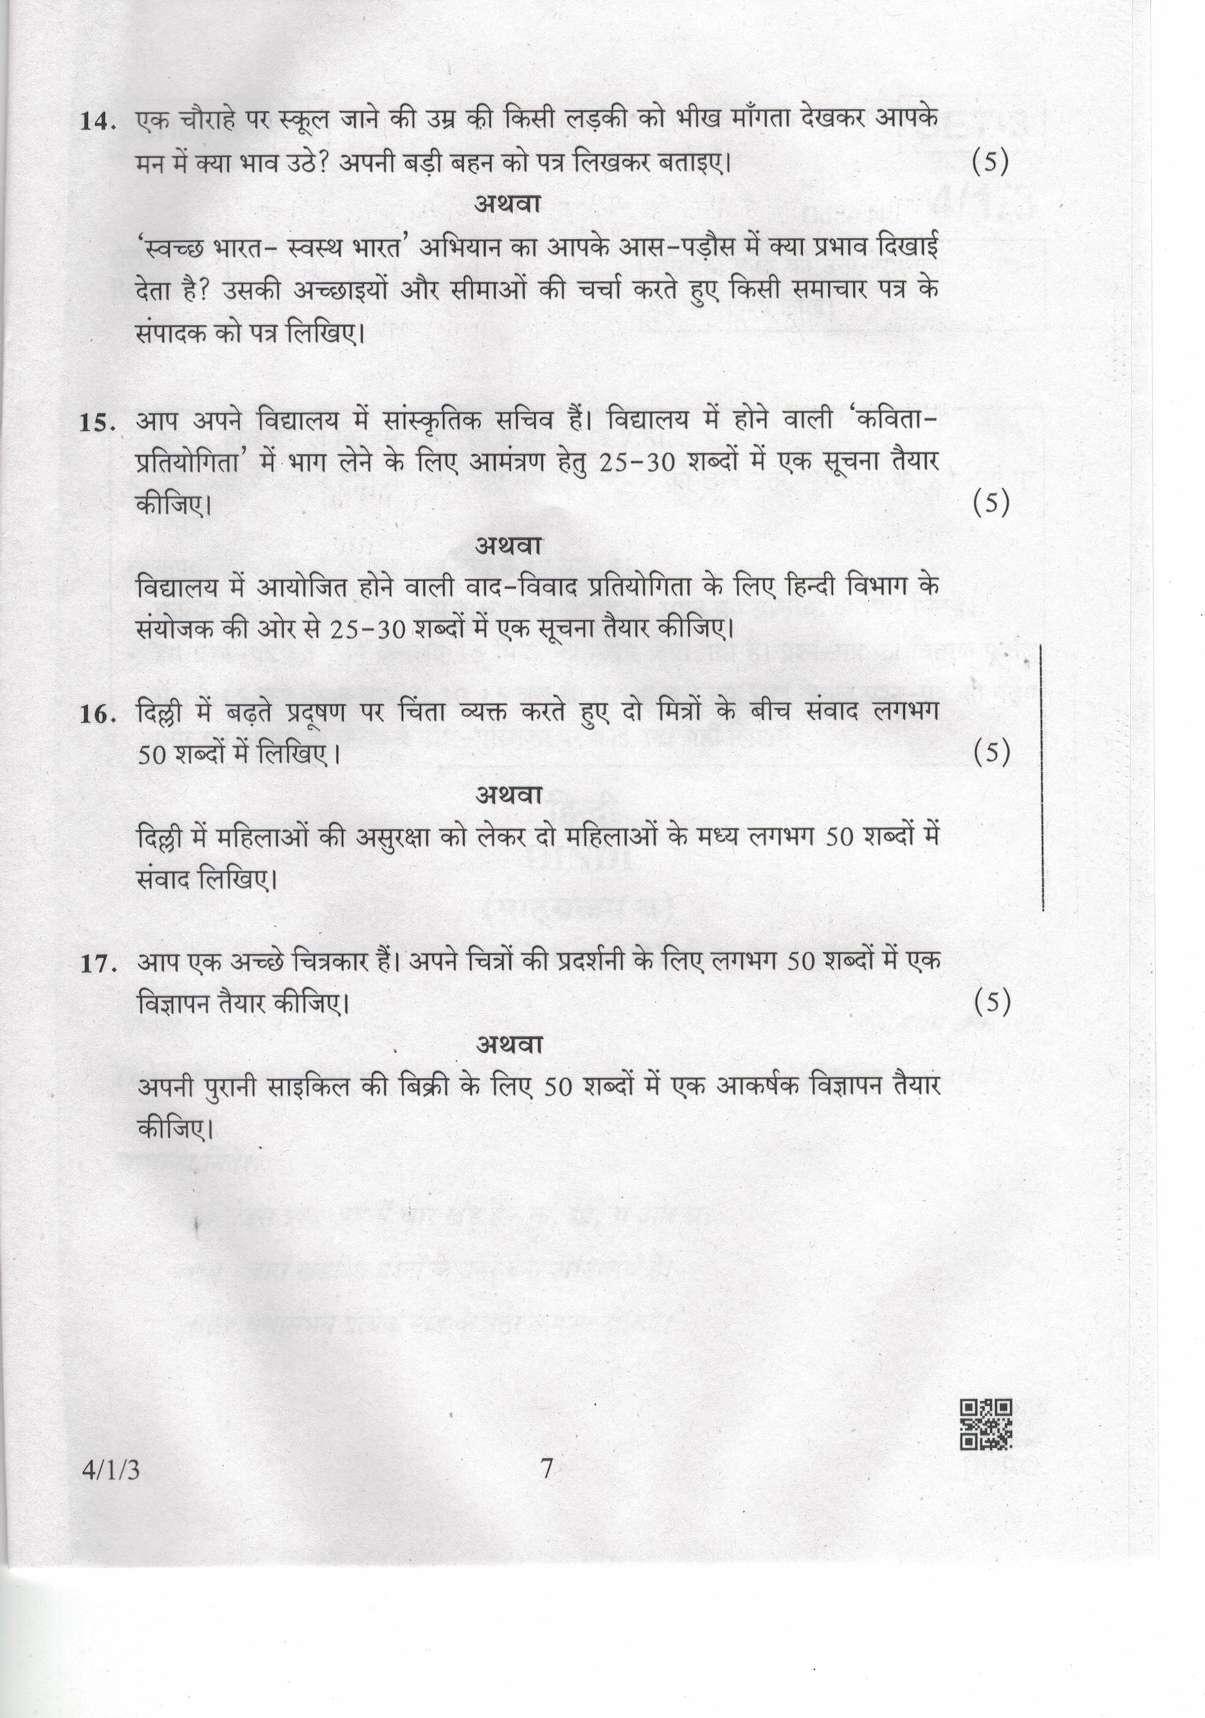 CBSE Class 10 4-1-3 Hindi-B 2019 Question Paper - Page 7